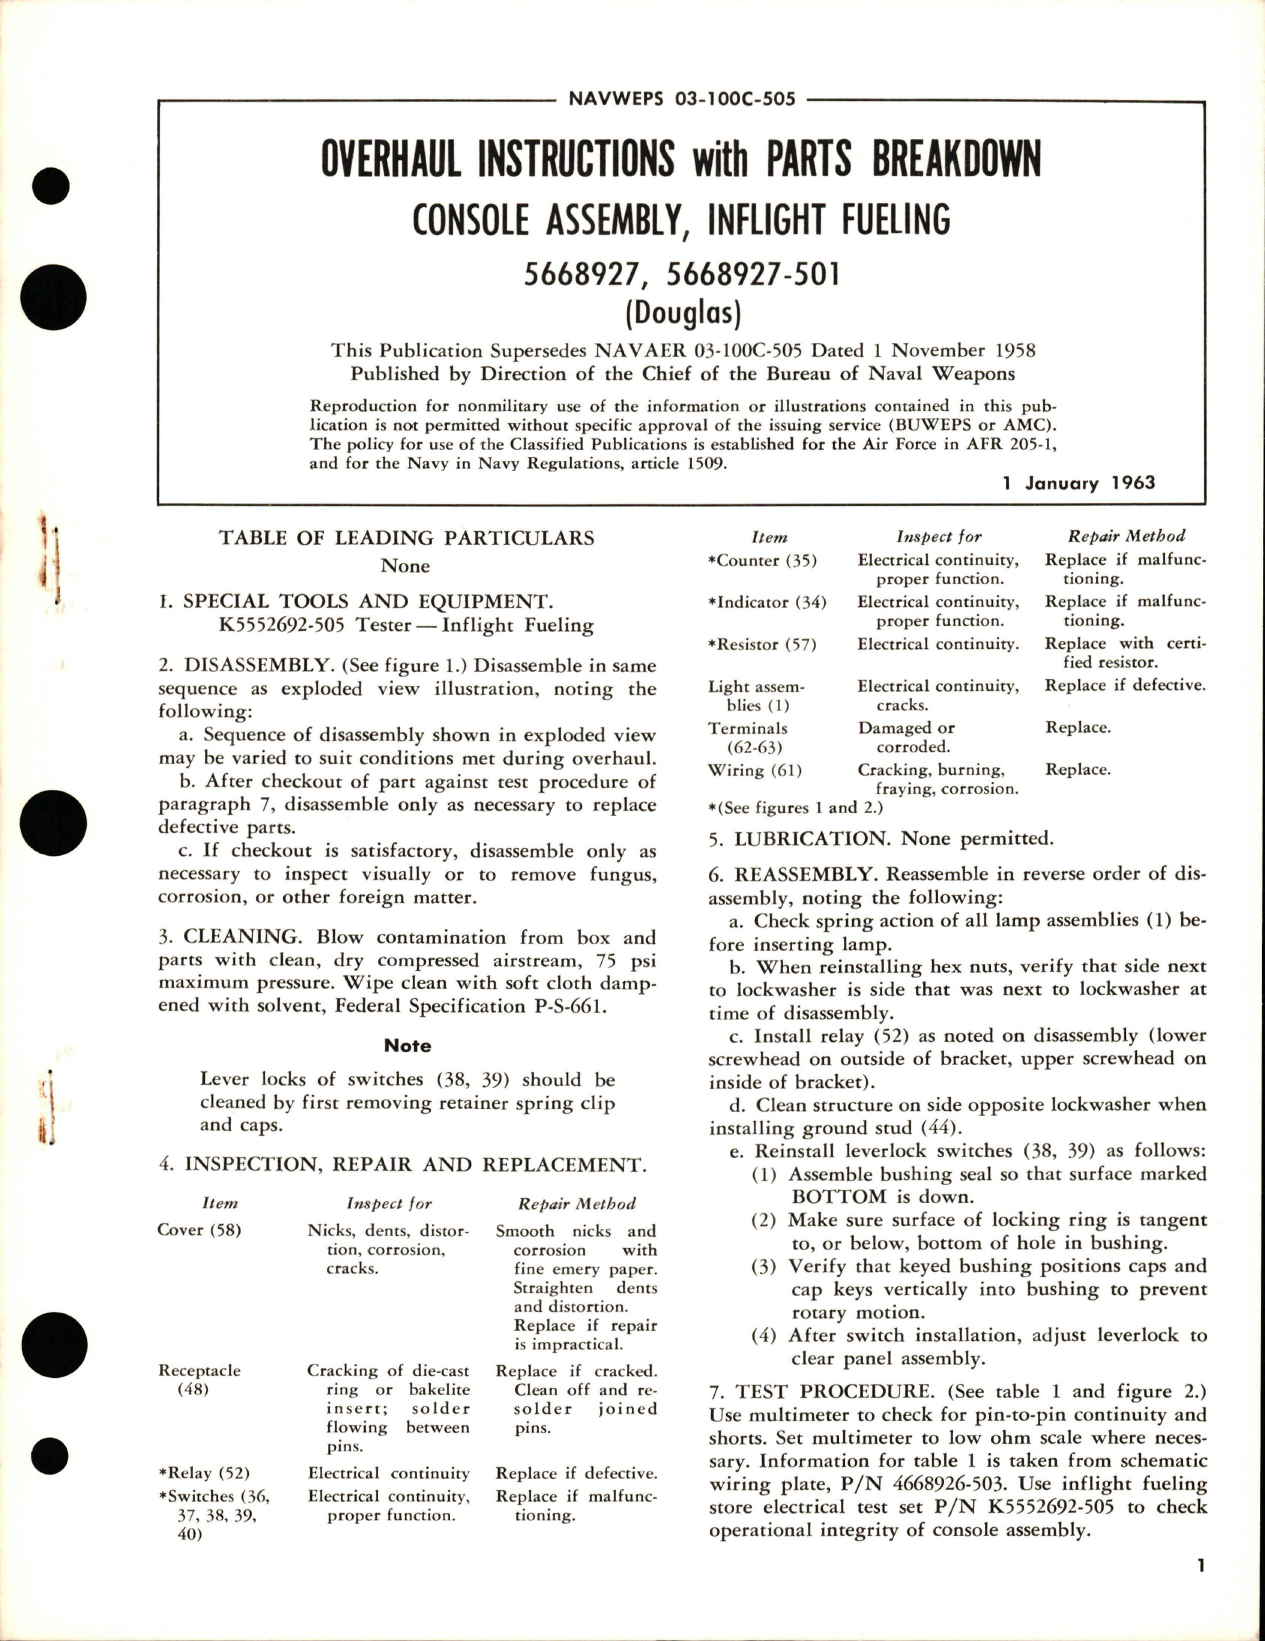 Sample page 1 from AirCorps Library document: Overhaul Instructions with Parts Breakdown for Inflight Fueling Console Assembly - 5668927 and 5668927-501